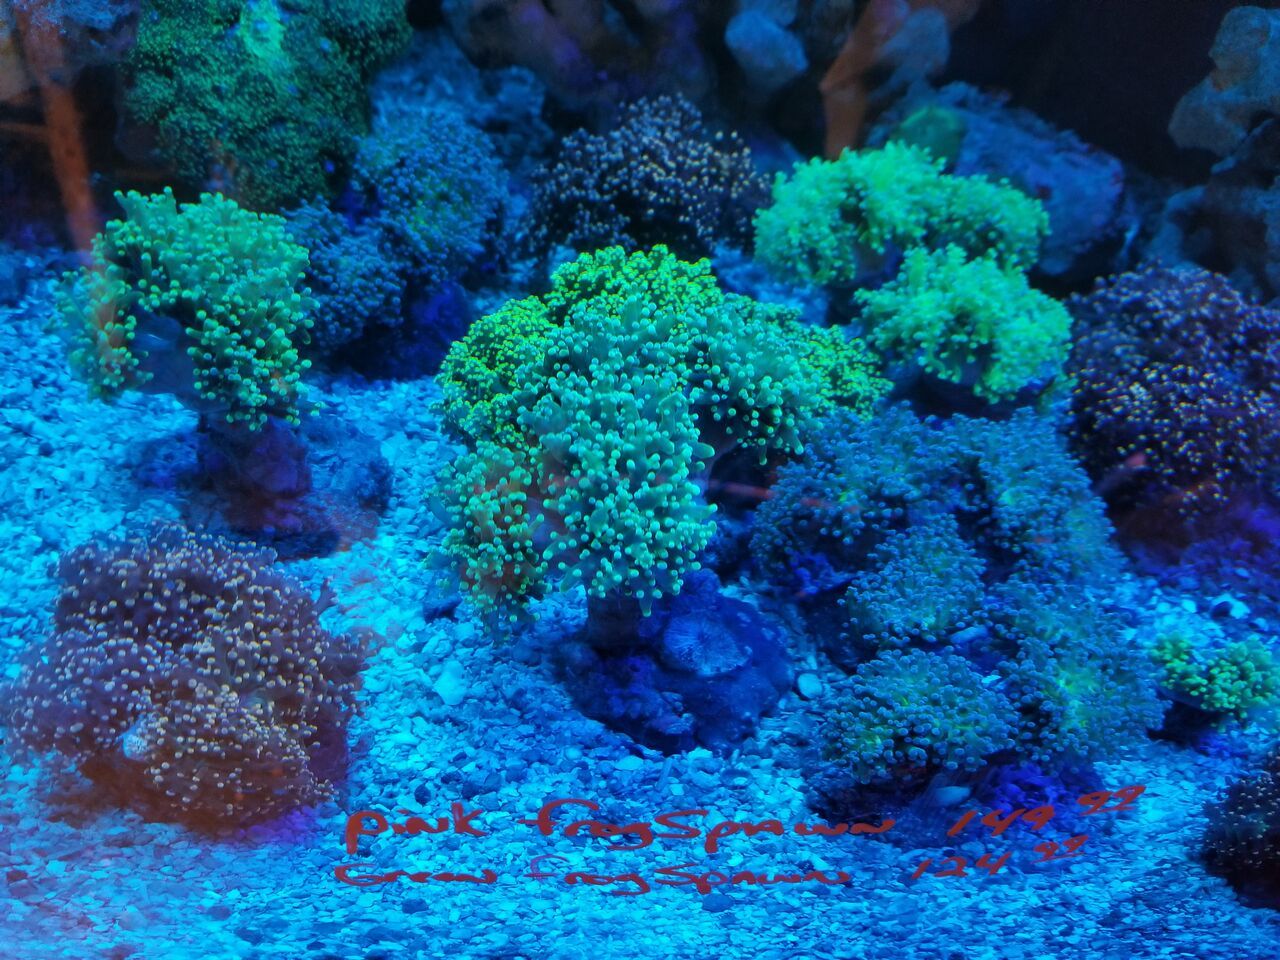 20171021 110709 preview zpsip5b8v2p - Clams, Euphyllia, Zoas, Shrooms, Leathers, And A Whole Lot More!!!